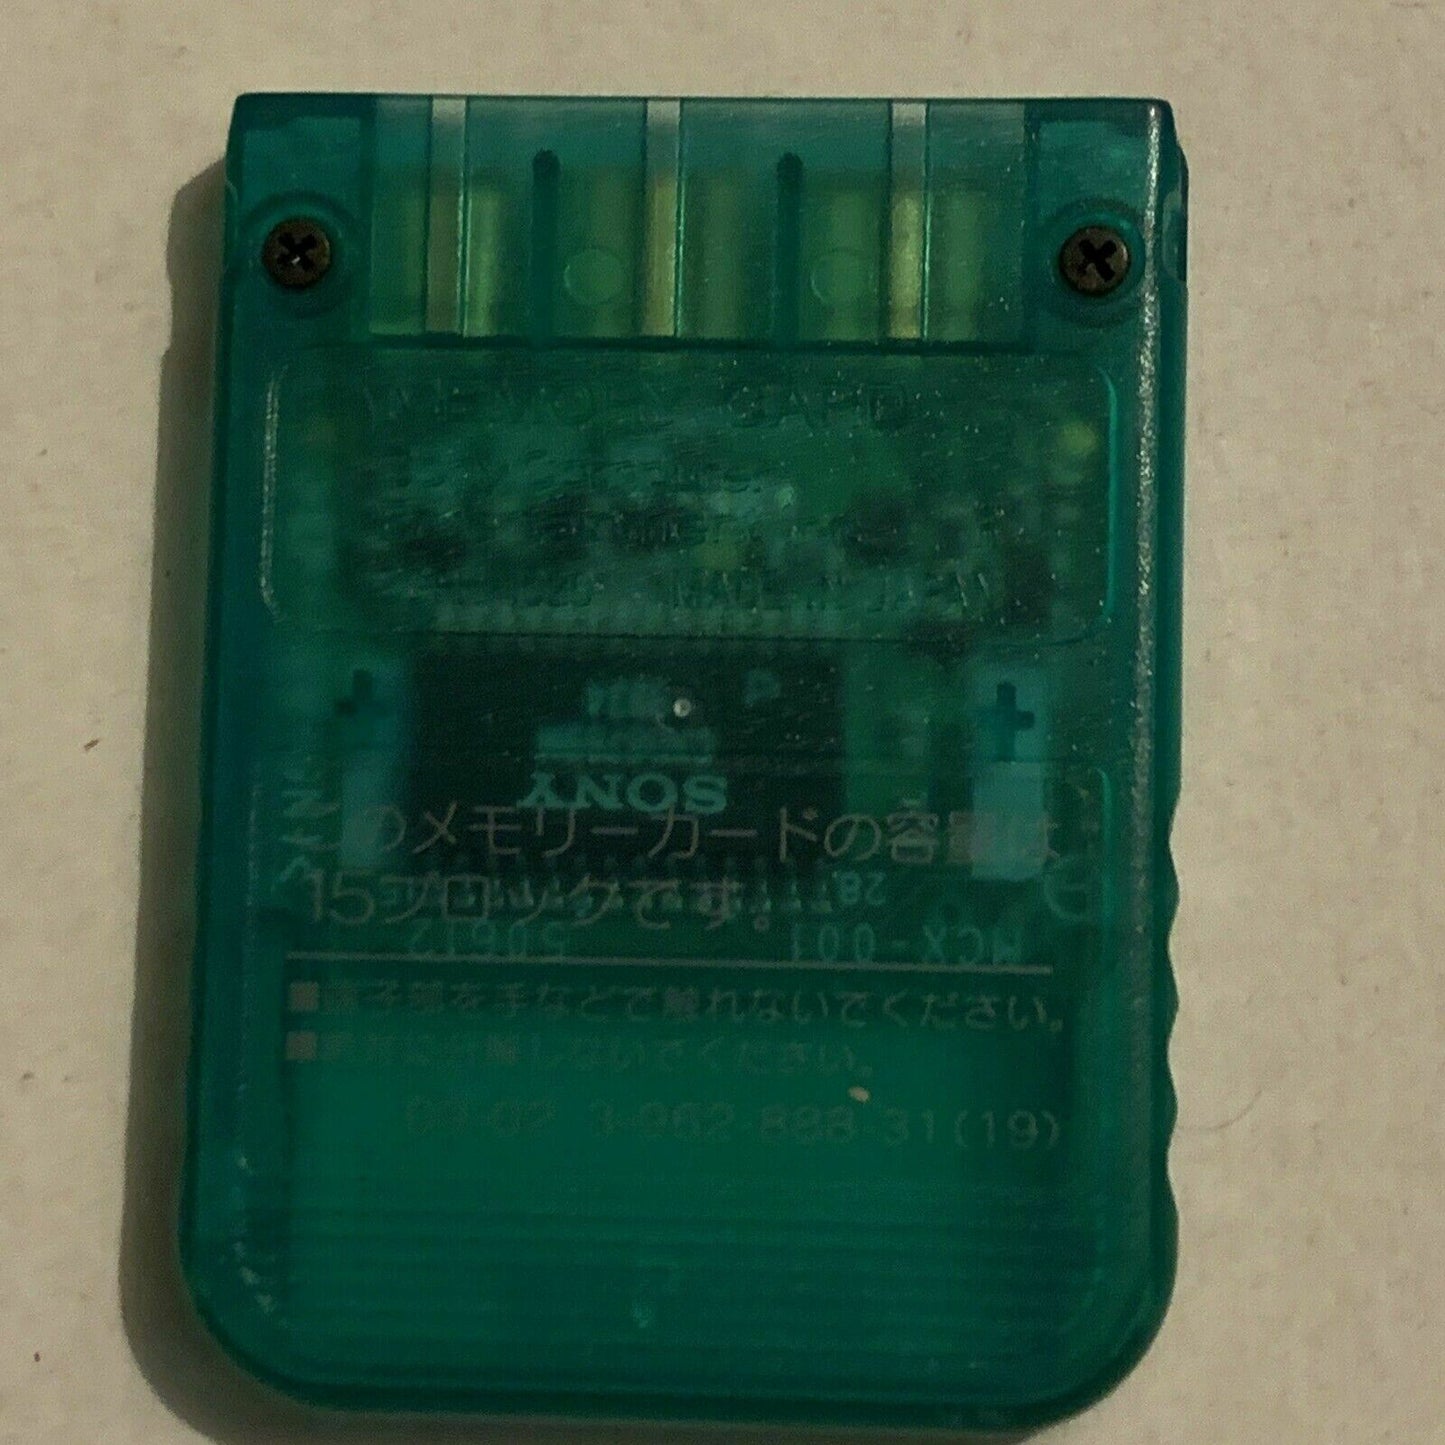 Genuine Official Sony Playstation 1 Memory Card SCPH-1020 Transparent Green RARE